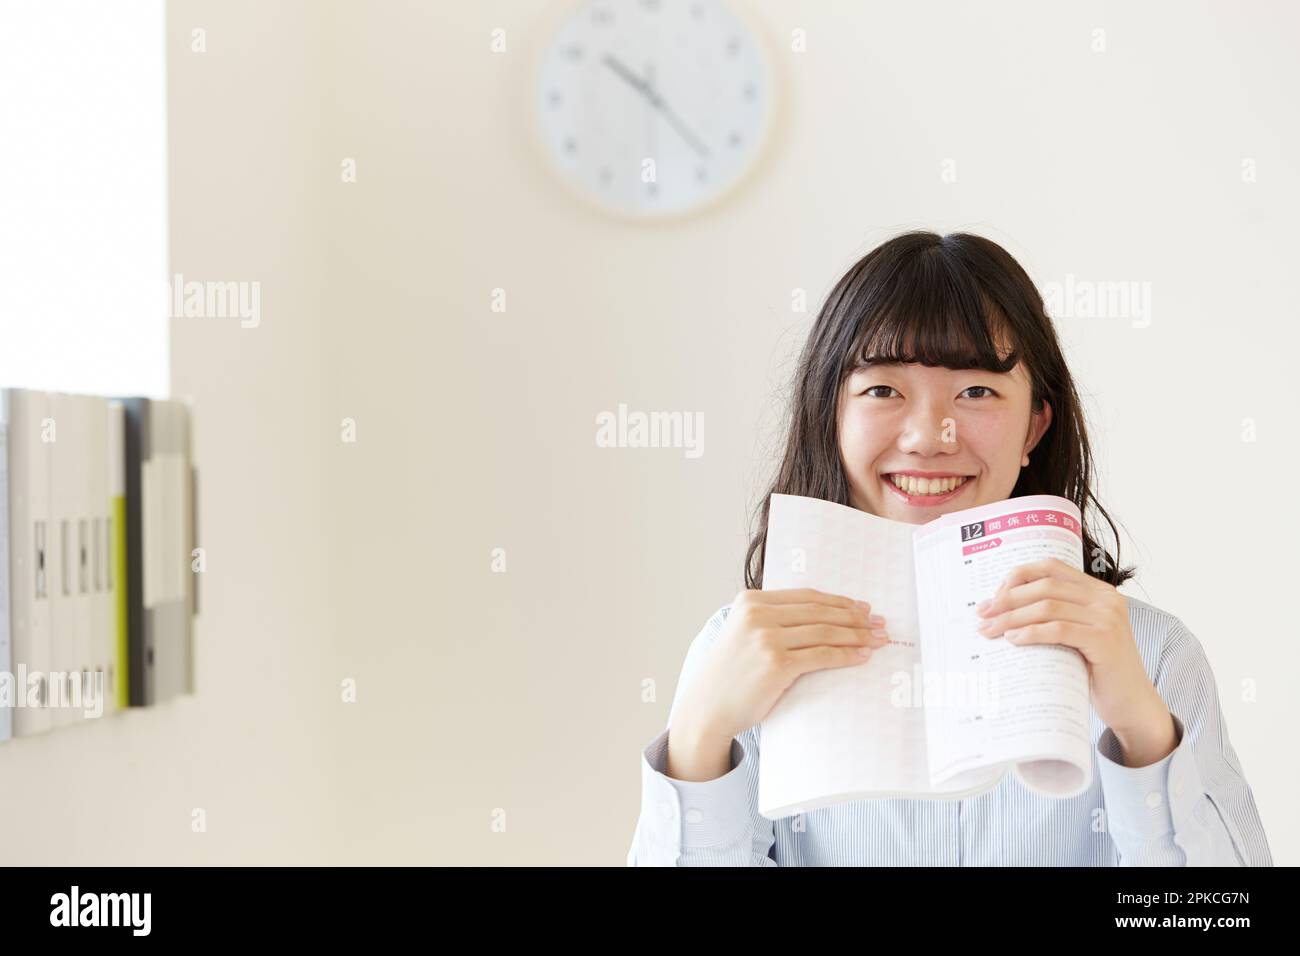 A high school girl holding a reference book with both hands and smiling Stock Photo